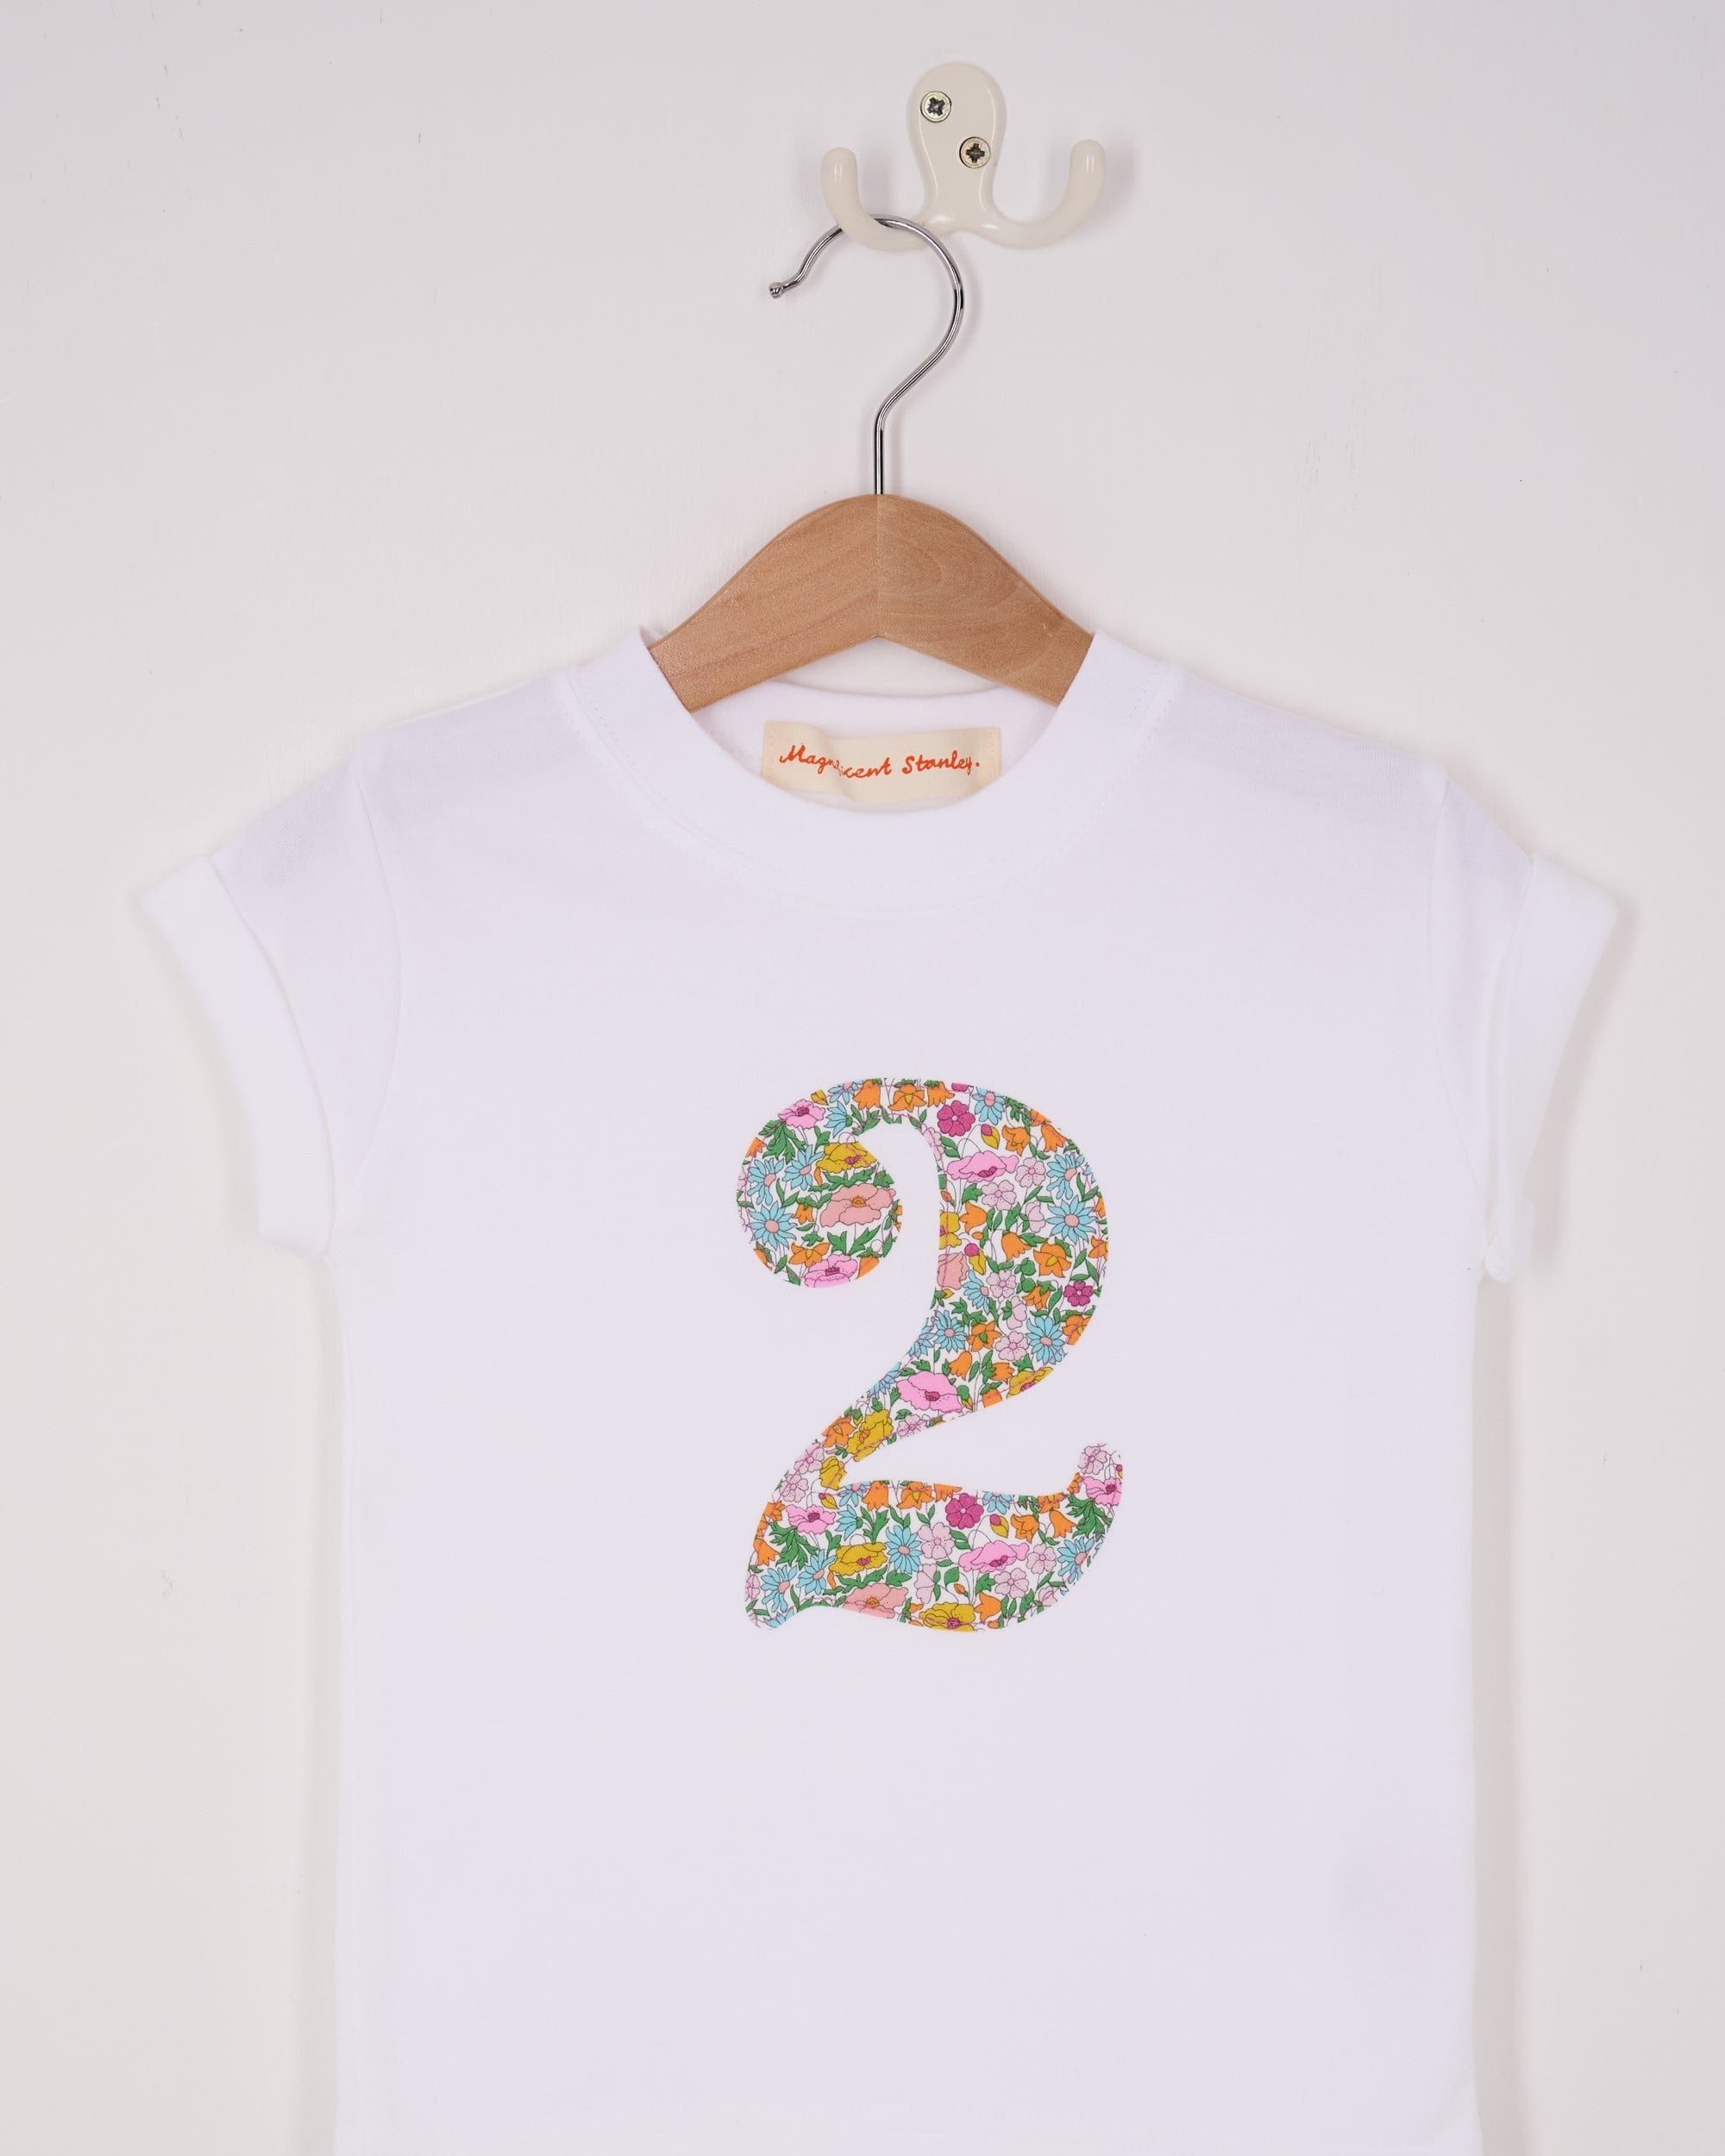 Magnificent Stanley Tee Number White T-Shirt in Poppy Forest Liberty Print